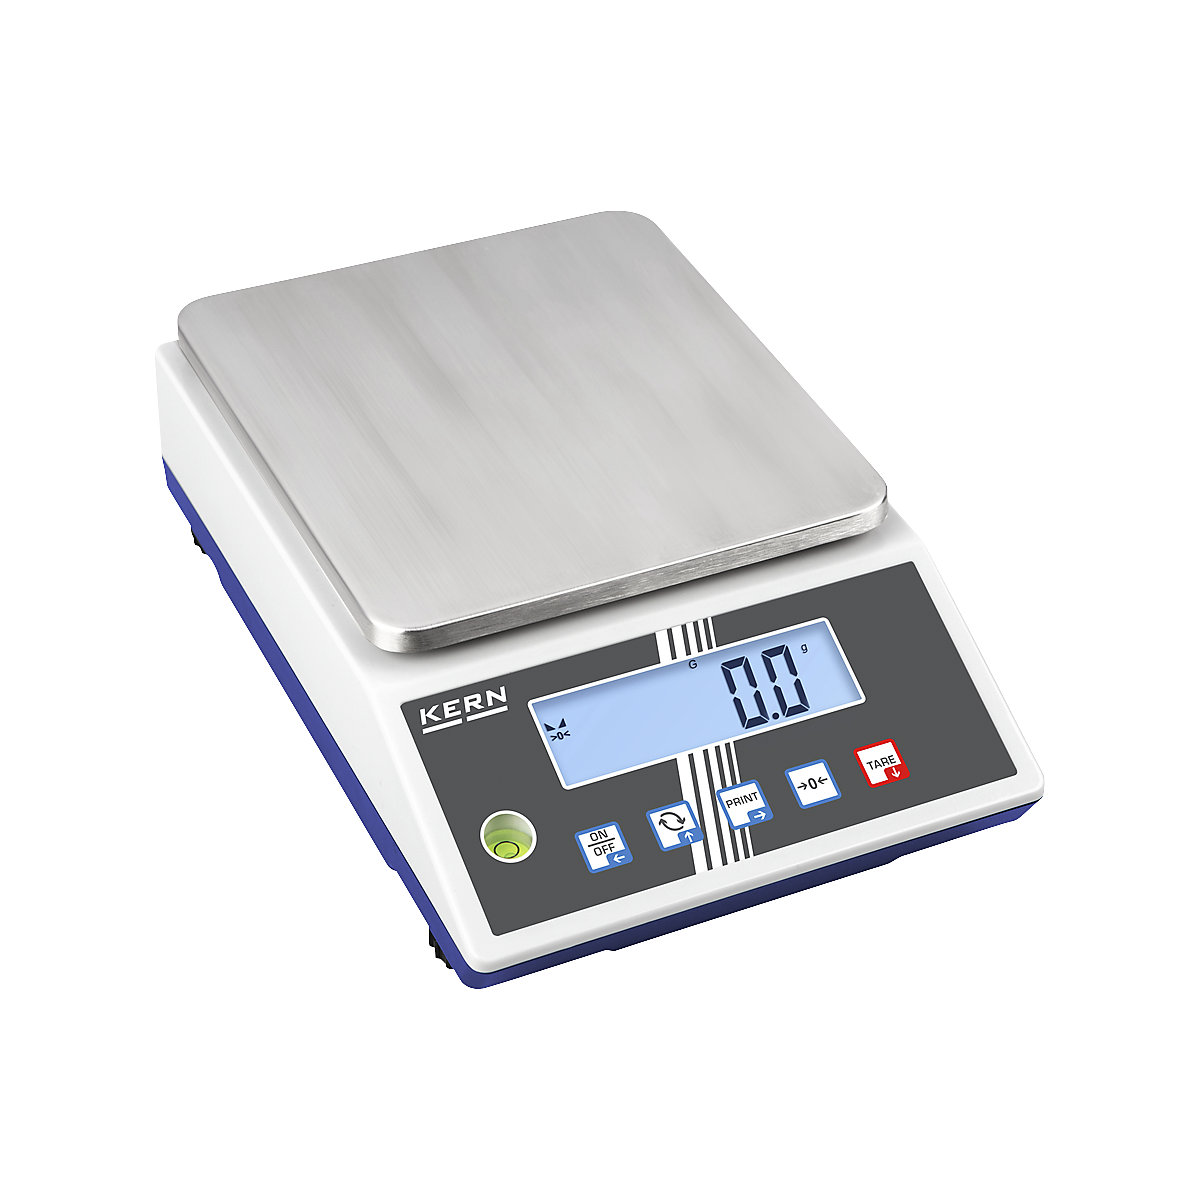 IoT-Line compact laboratory scales, weighing plate 150 x 170 mm, weighing range up to 6 kg, read-out accuracy 0.1 g-1